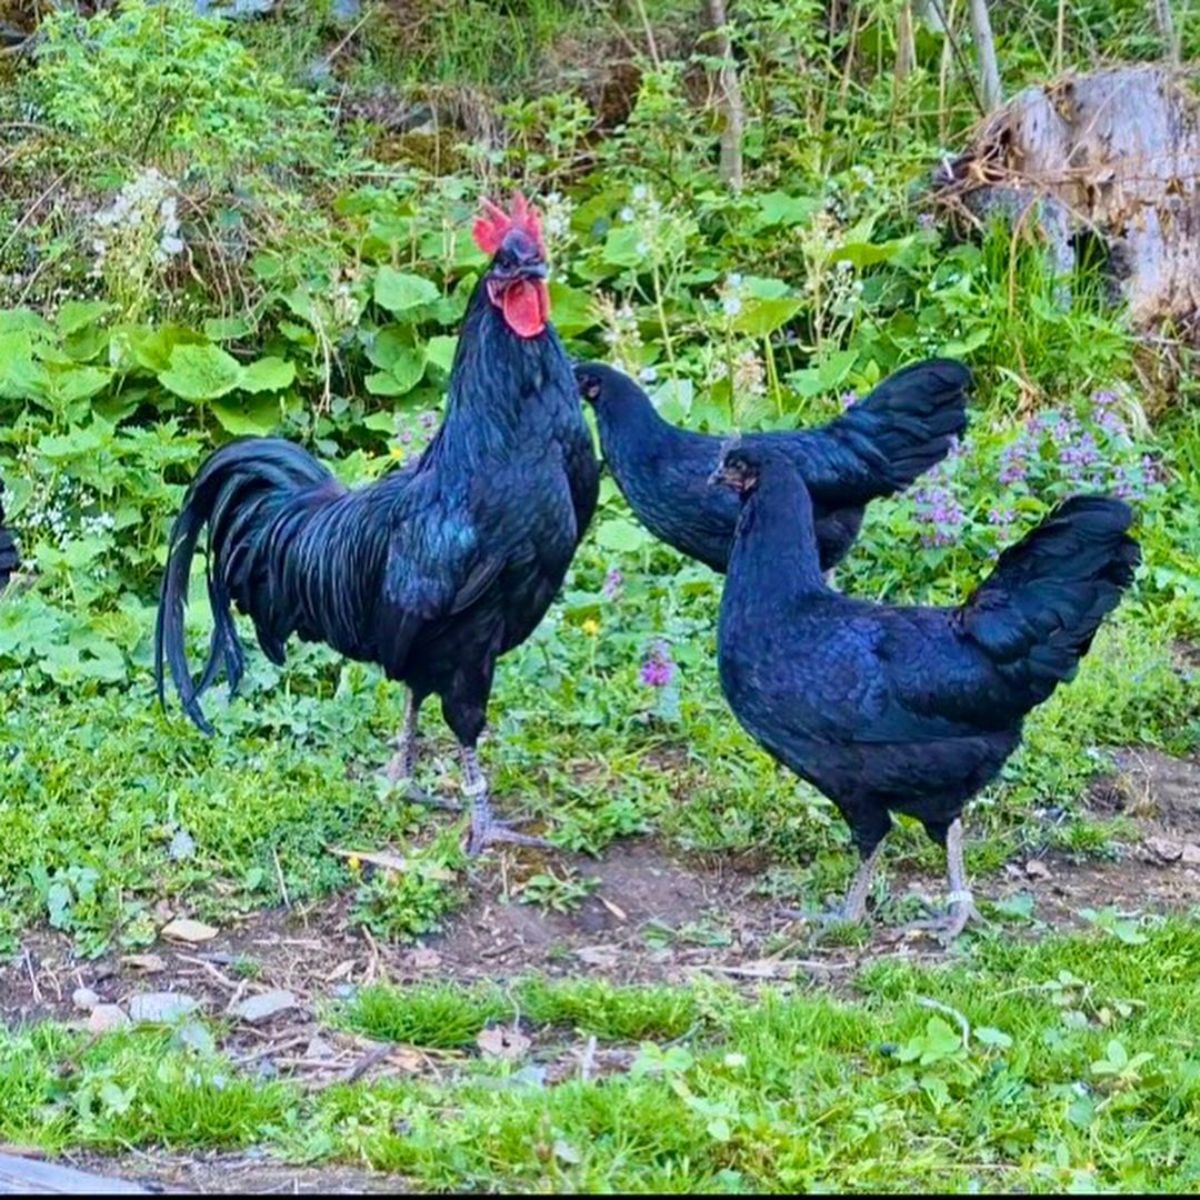 A Tomaru chicken flock in a backyard looking for food.